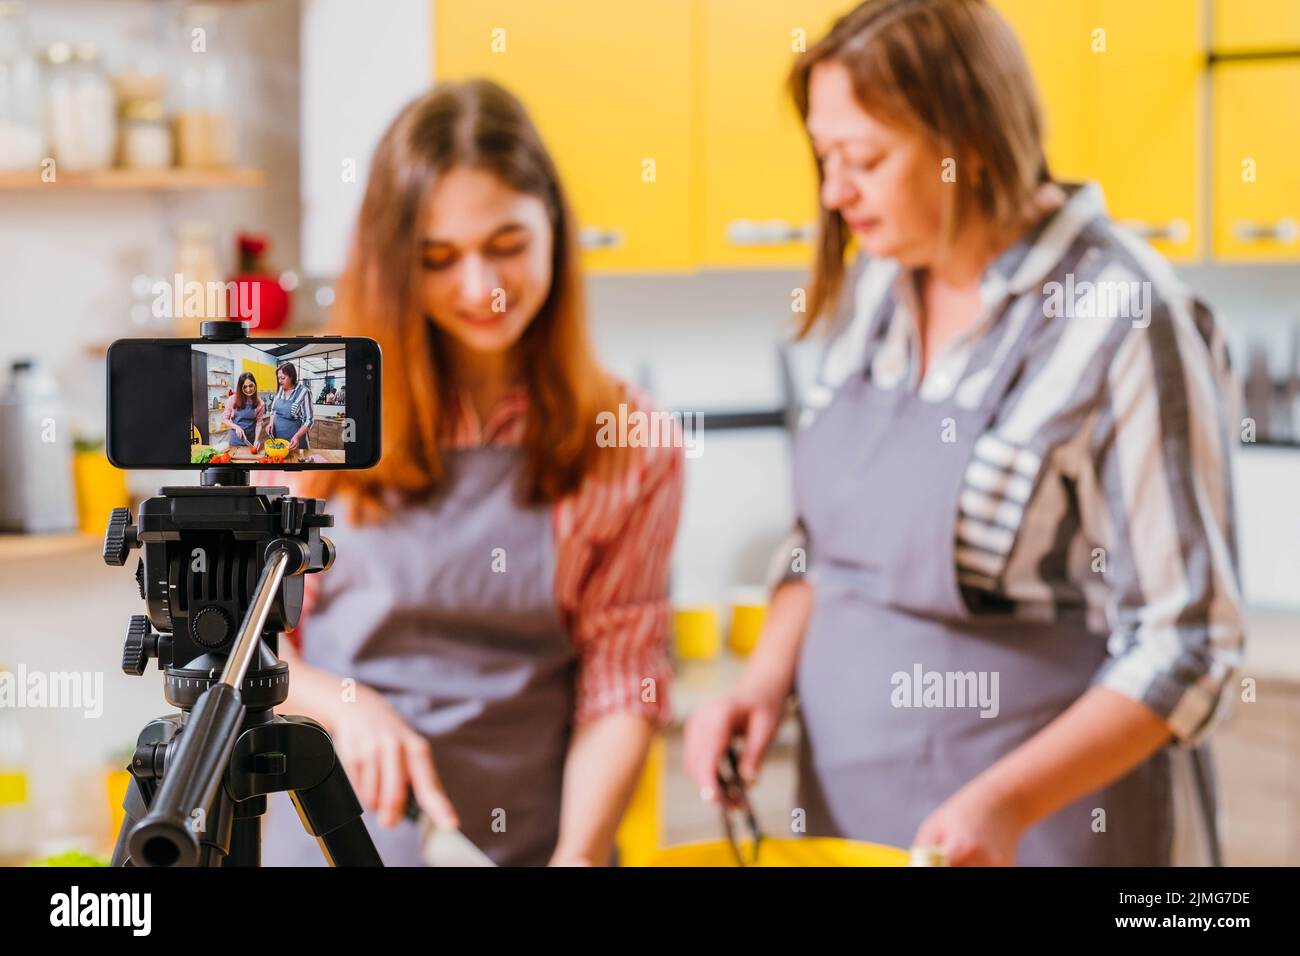 family culinary video blog cooking kitchen Stock Photo